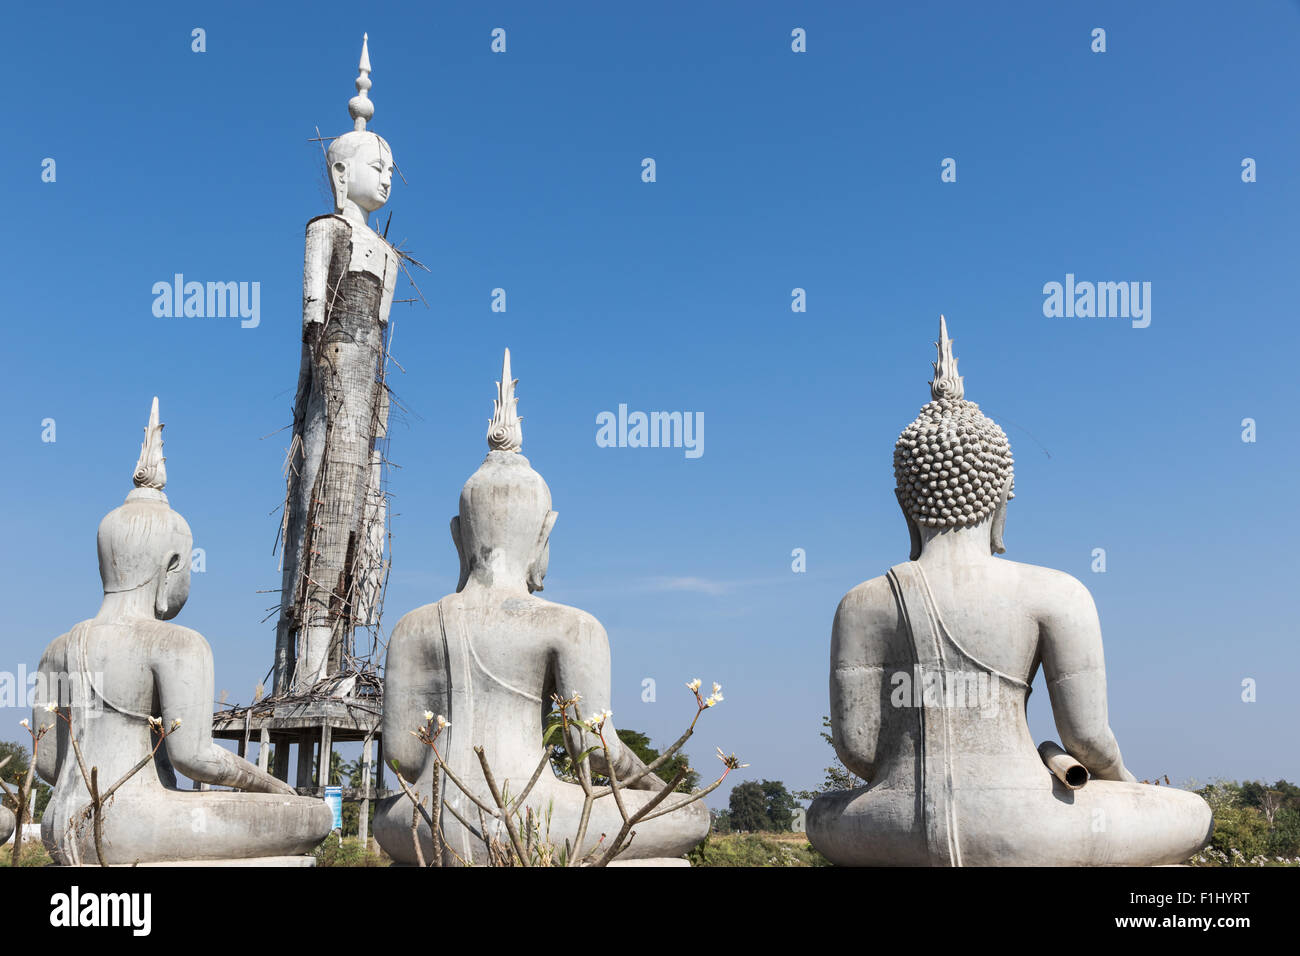 Old Buddha statue to the worship, or regarded as the dwelling place, of a god or gods or other objects of religious reverence. Stock Photo